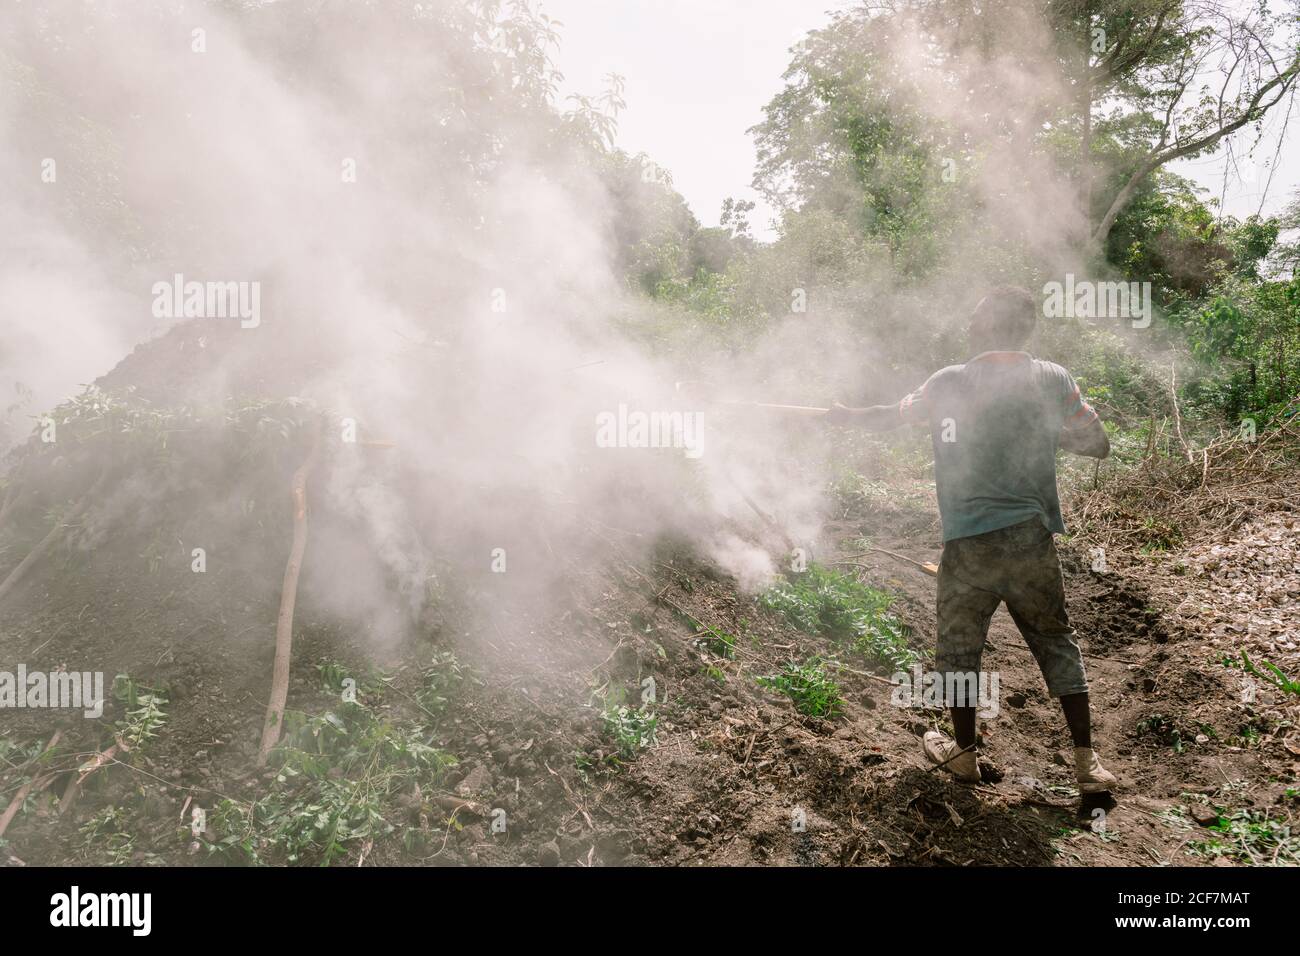 Gambia, Africa - August 4, 2019: Back view of black hardworking man throwing ground with shovel on steaming natural mound in forest Stock Photo